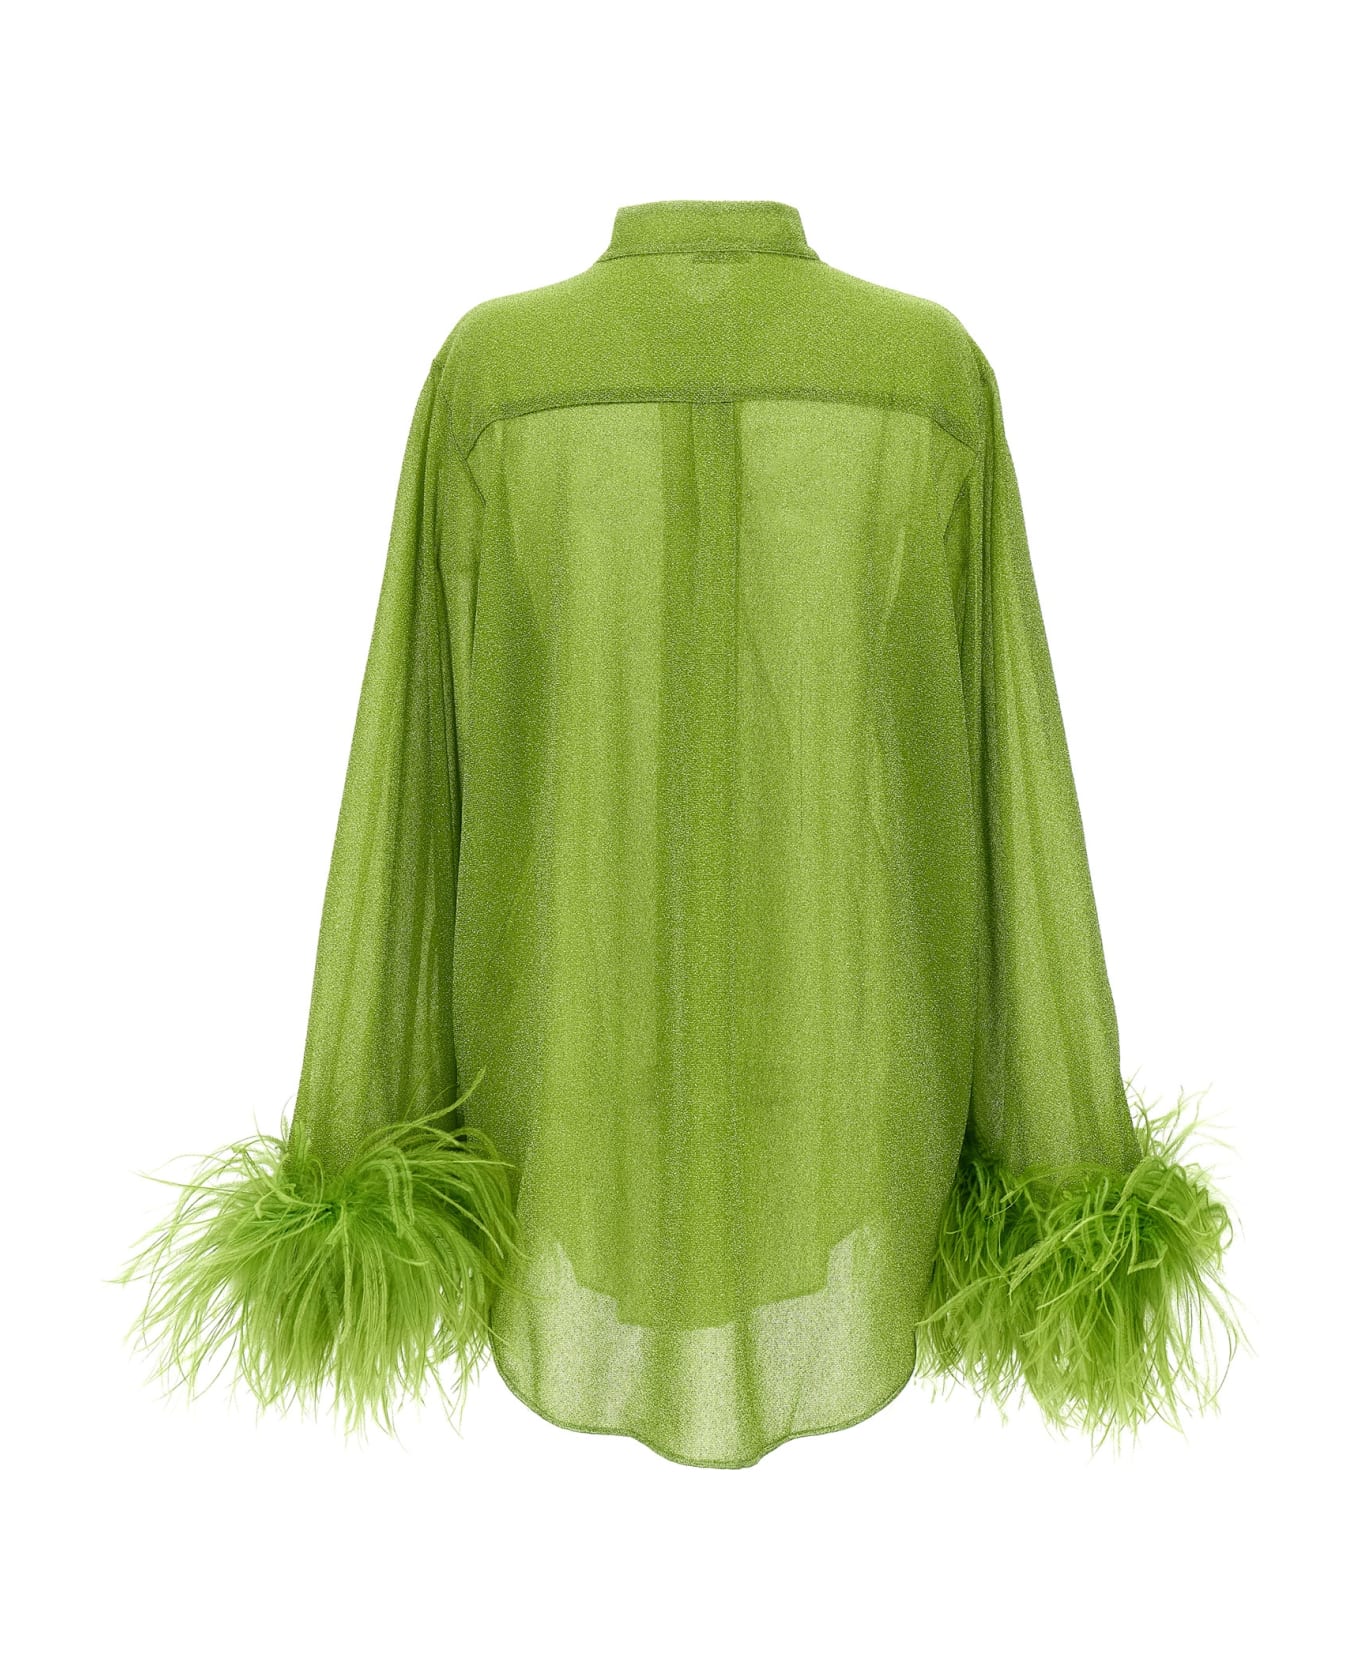 Oseree 'lumiere Plumage' Shirt - Lime